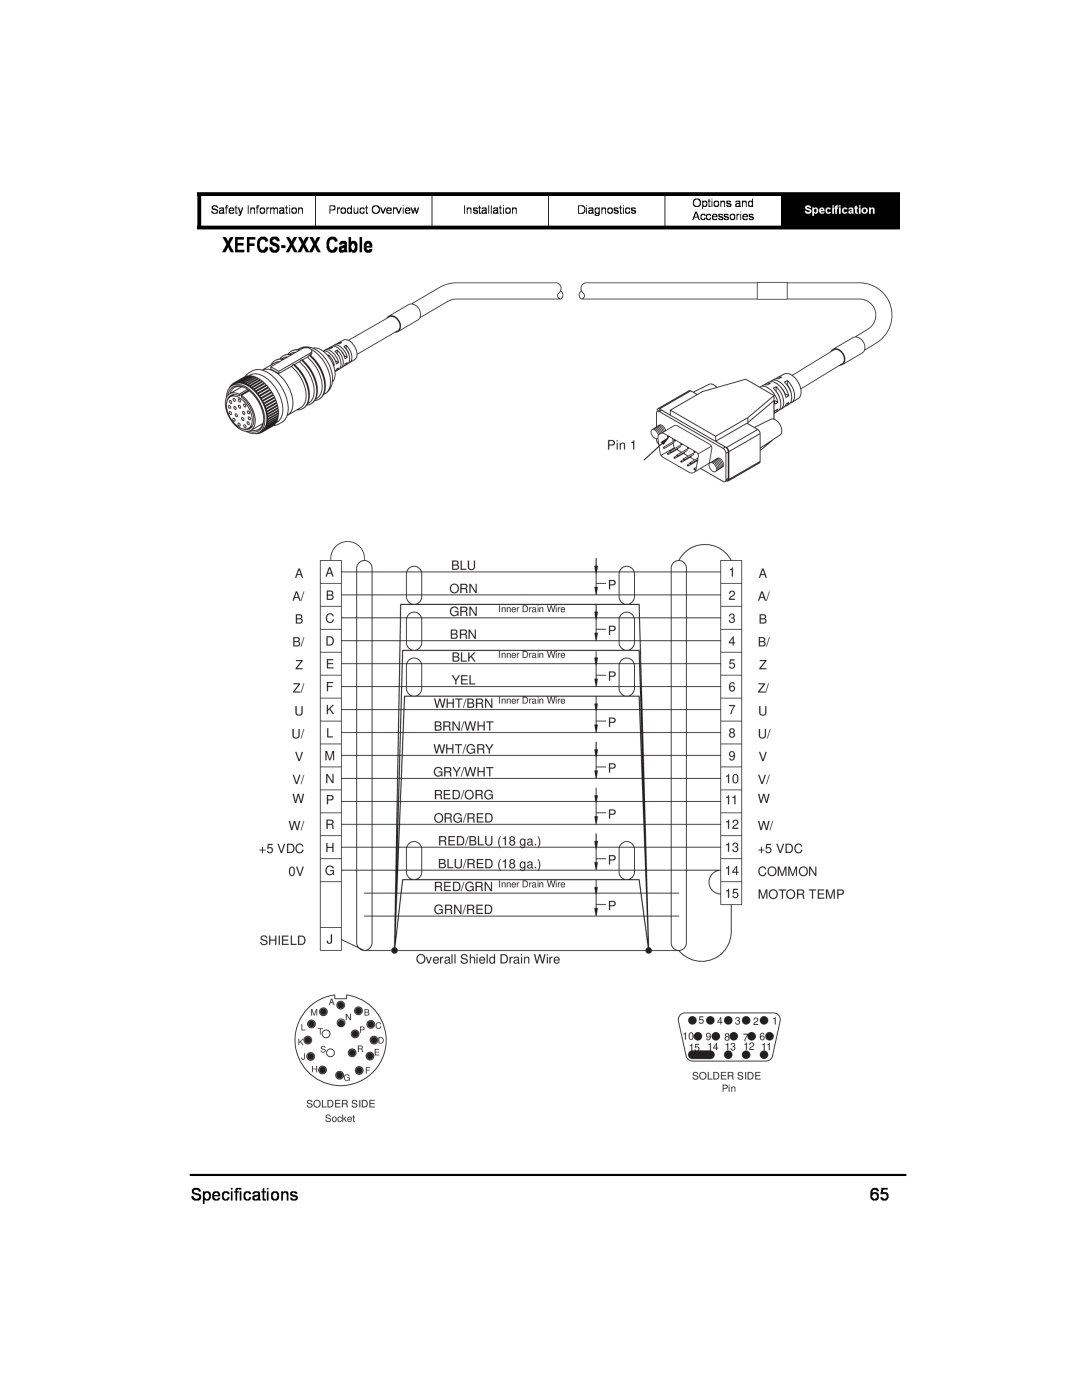 Emerson 400518-01 installation manual XEFCS-XXX Cable, Specifications 